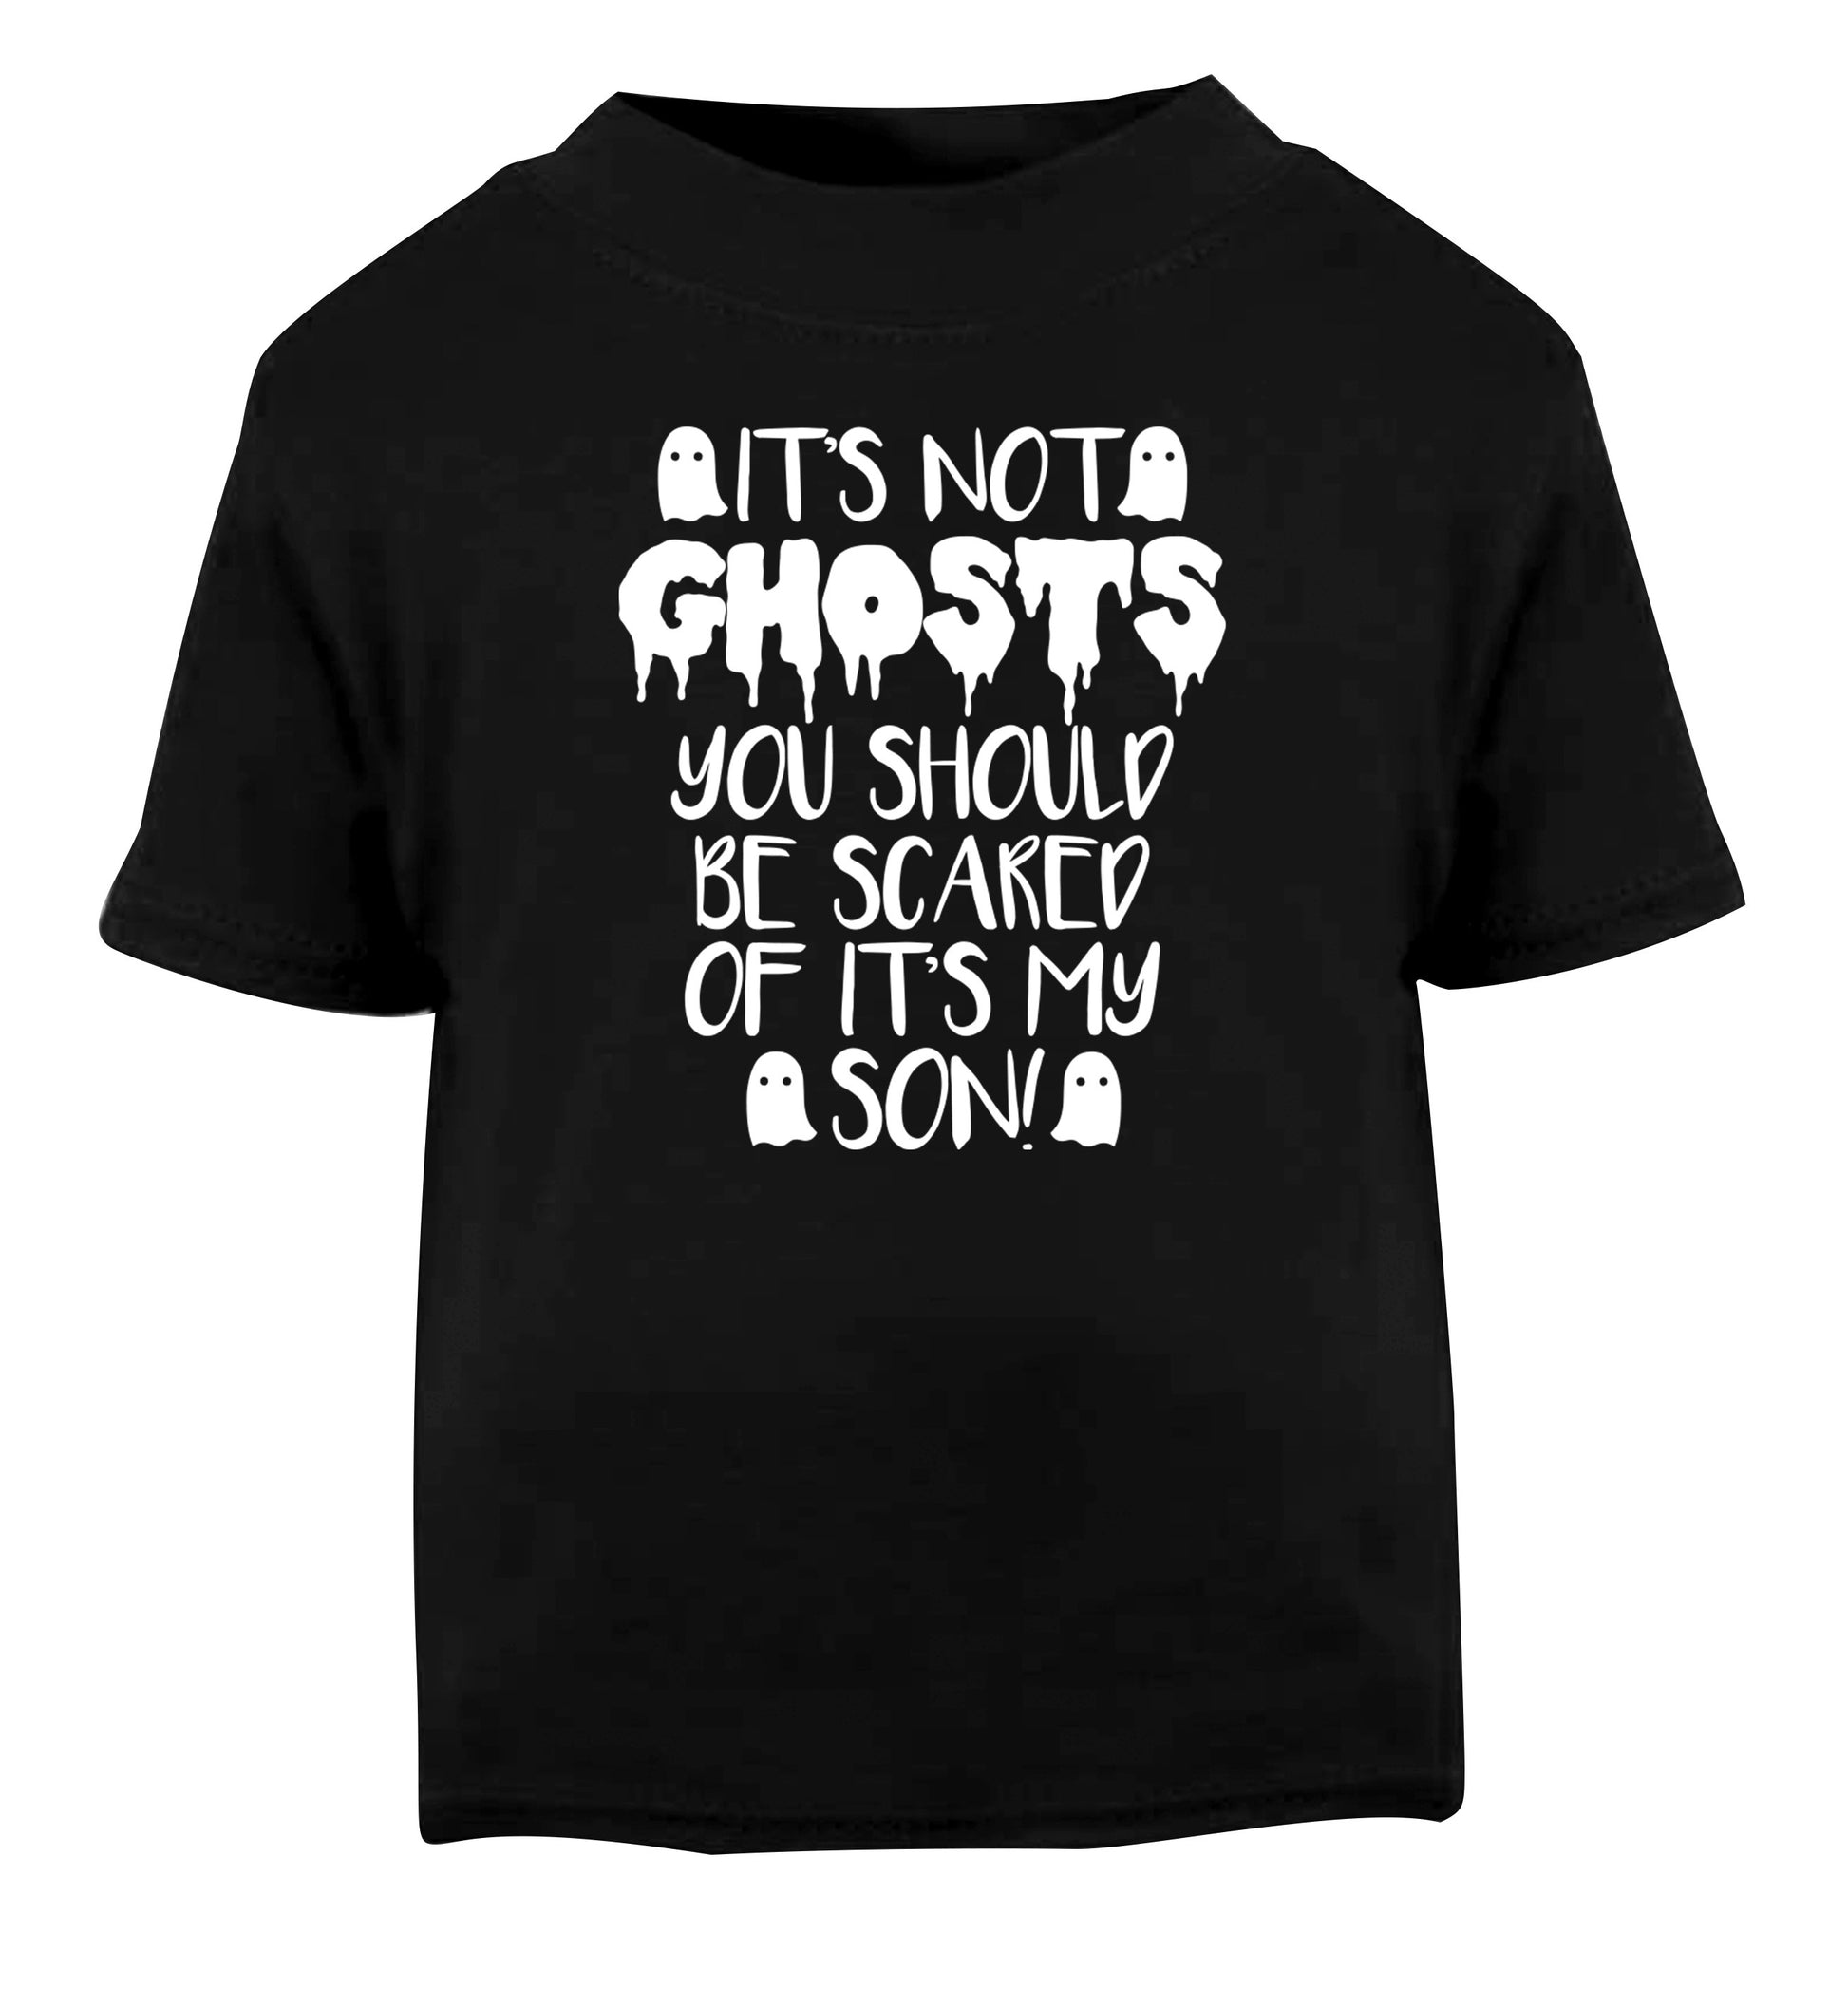 It's not ghosts you should be scared of it's my son! Black Baby Toddler Tshirt 2 years